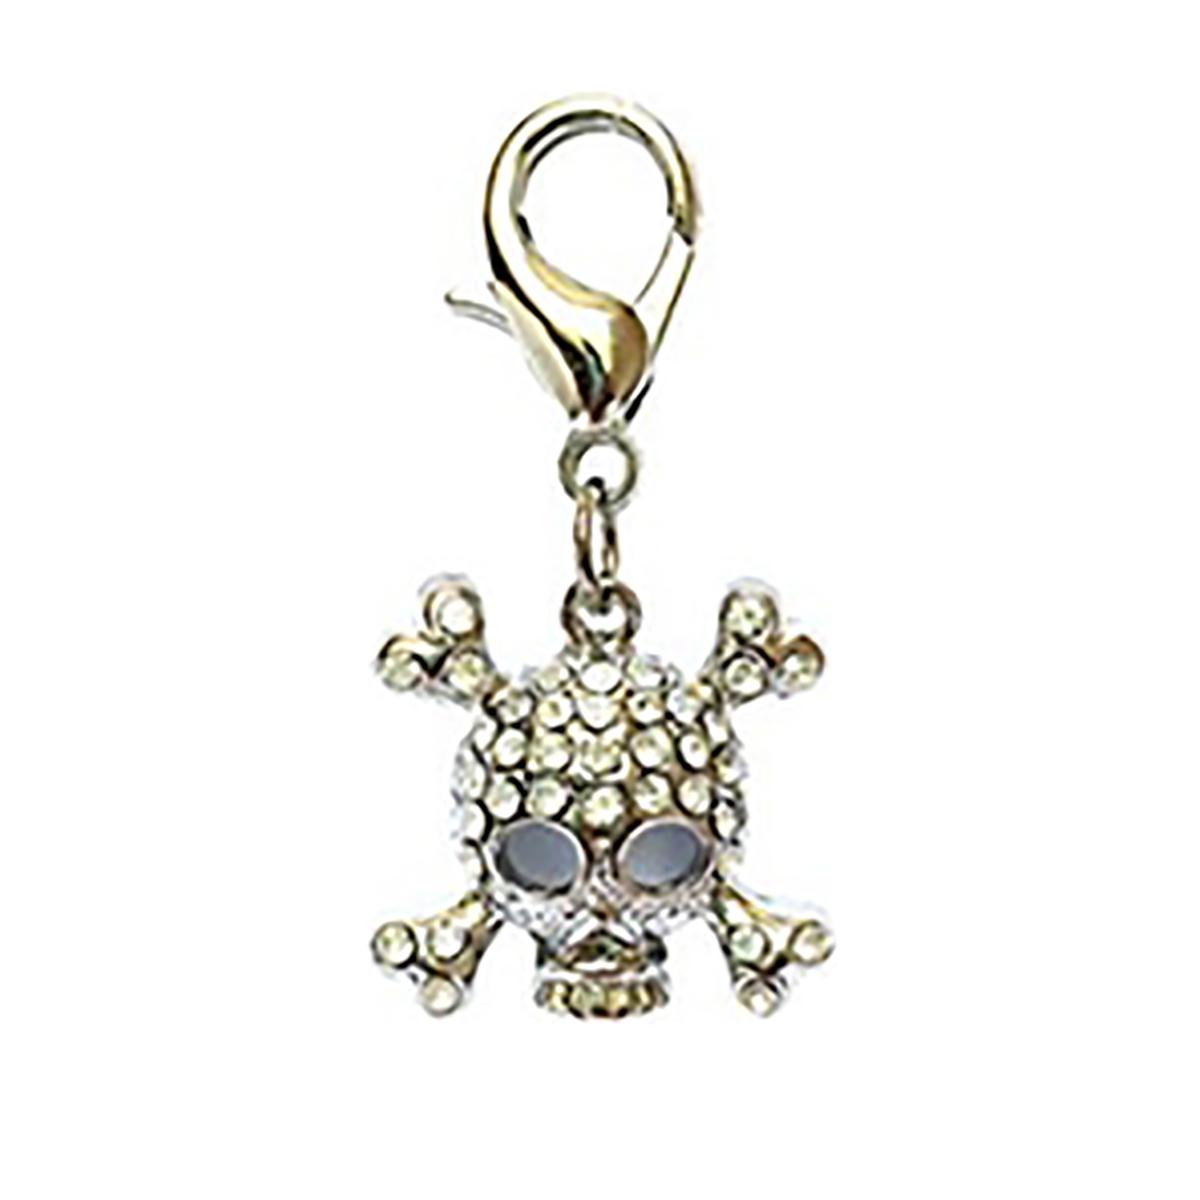 Skull D-Ring Pet Collar Charm by FouFou Dog - Clear